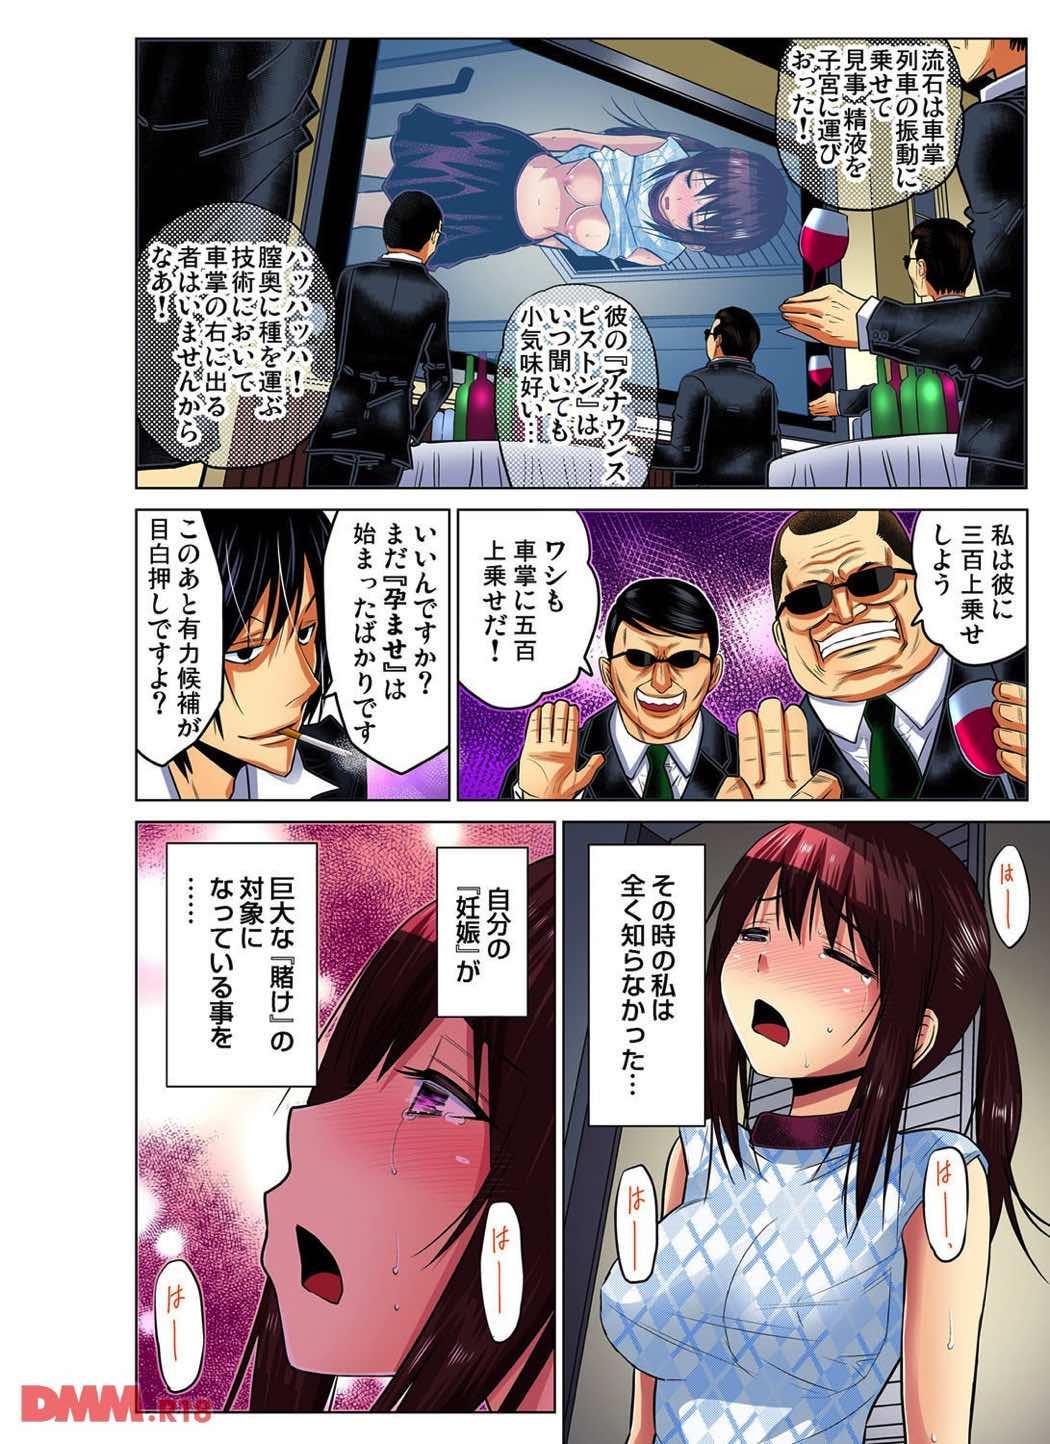 Squirters 人妻あそび Assfucked - Page 25